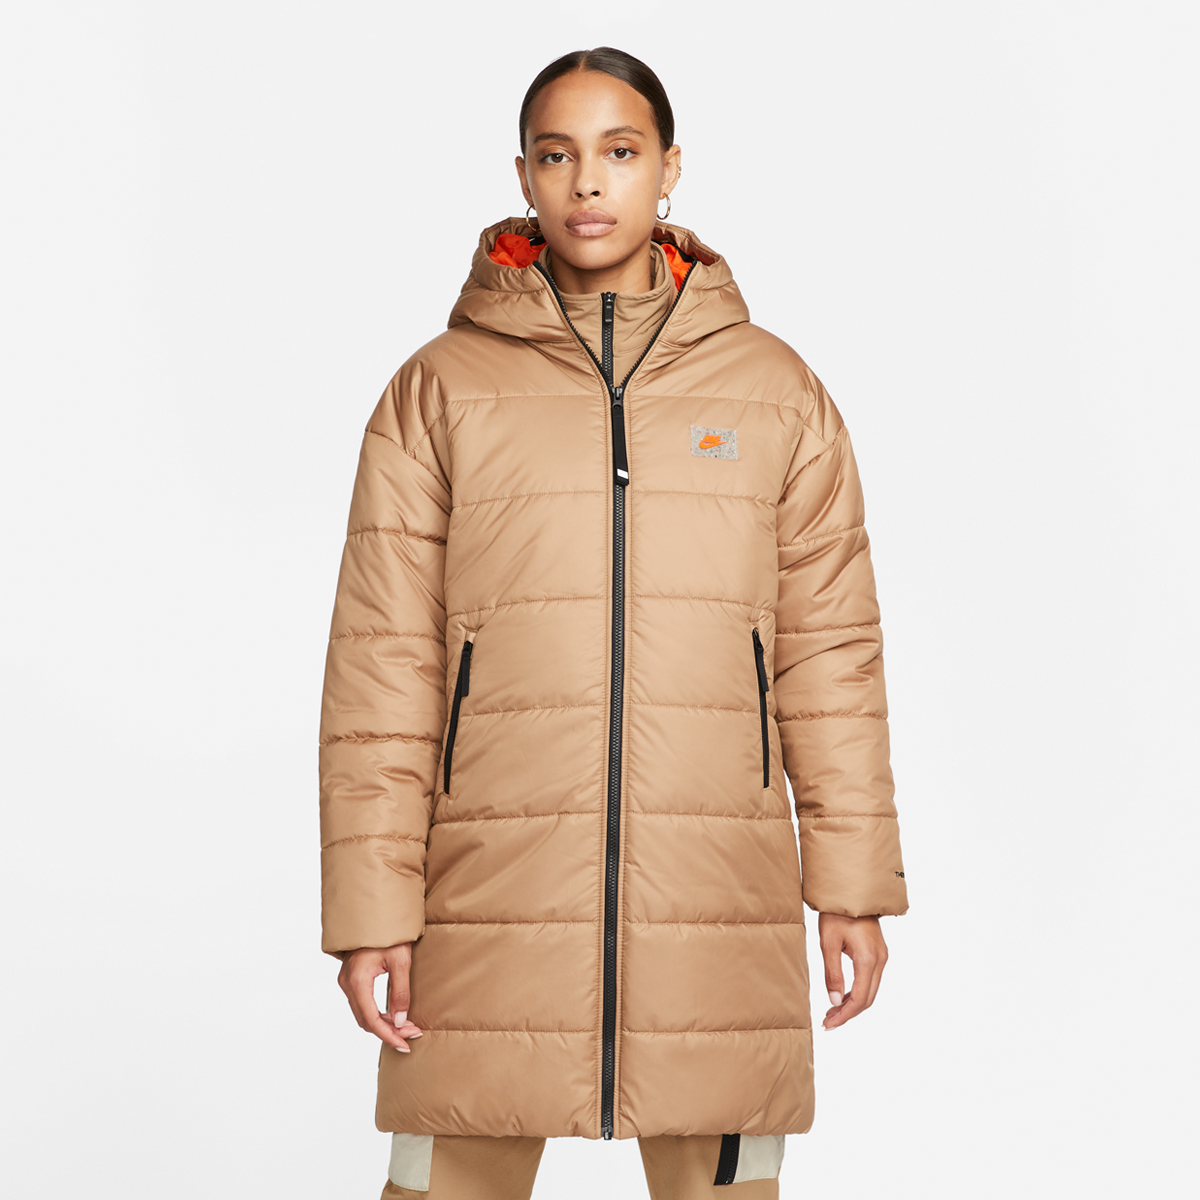 nike sportswear therma-fit repel synthetic-fill hooded parka, parkas, vêtements, dk driftwood/safety orange, taille: xs, tailles disponibles: